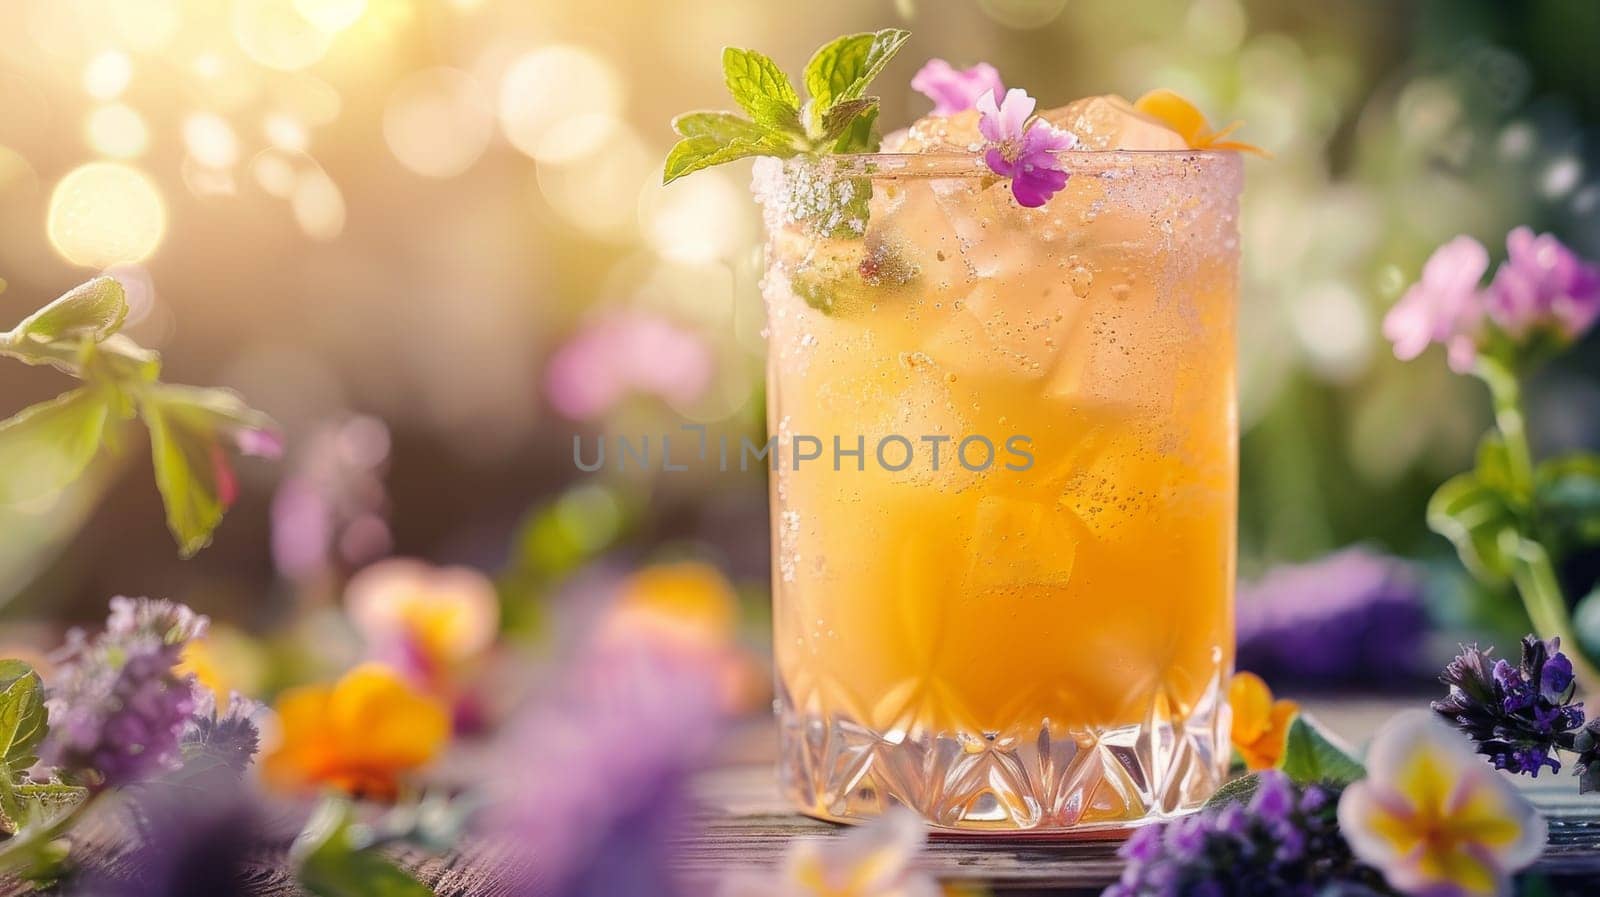 A glass of a drink with a flower garnish on top by itchaznong